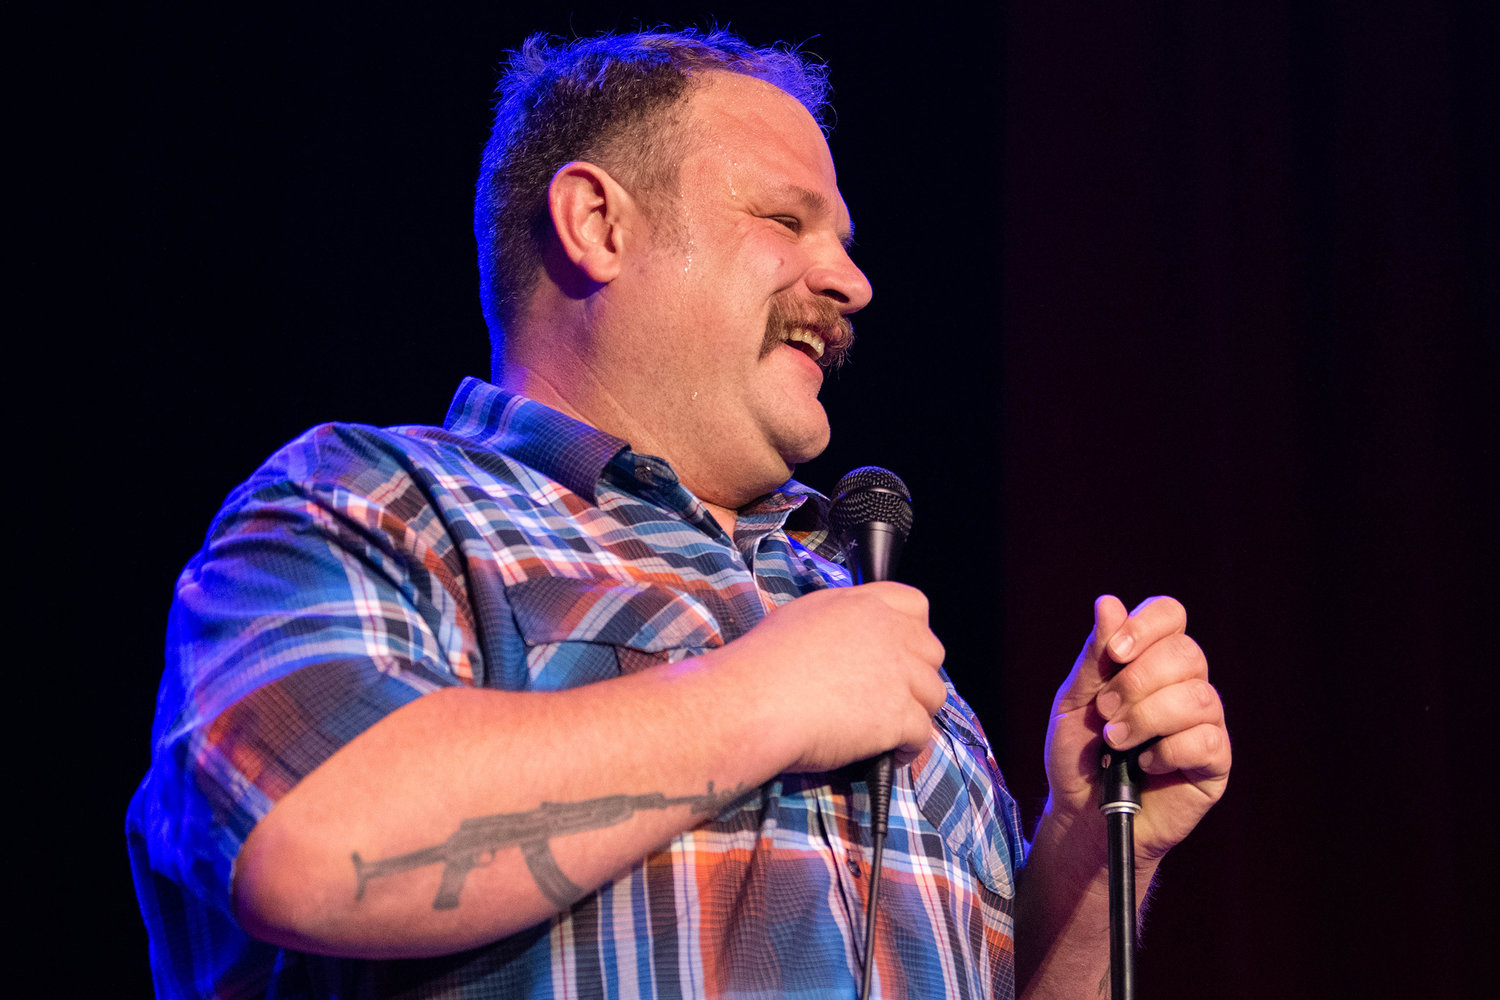 Local favorite Sam Miller laughs while telling jokes Friday night at the McFiler’s Chehalis Theater during a sold out comedy show.